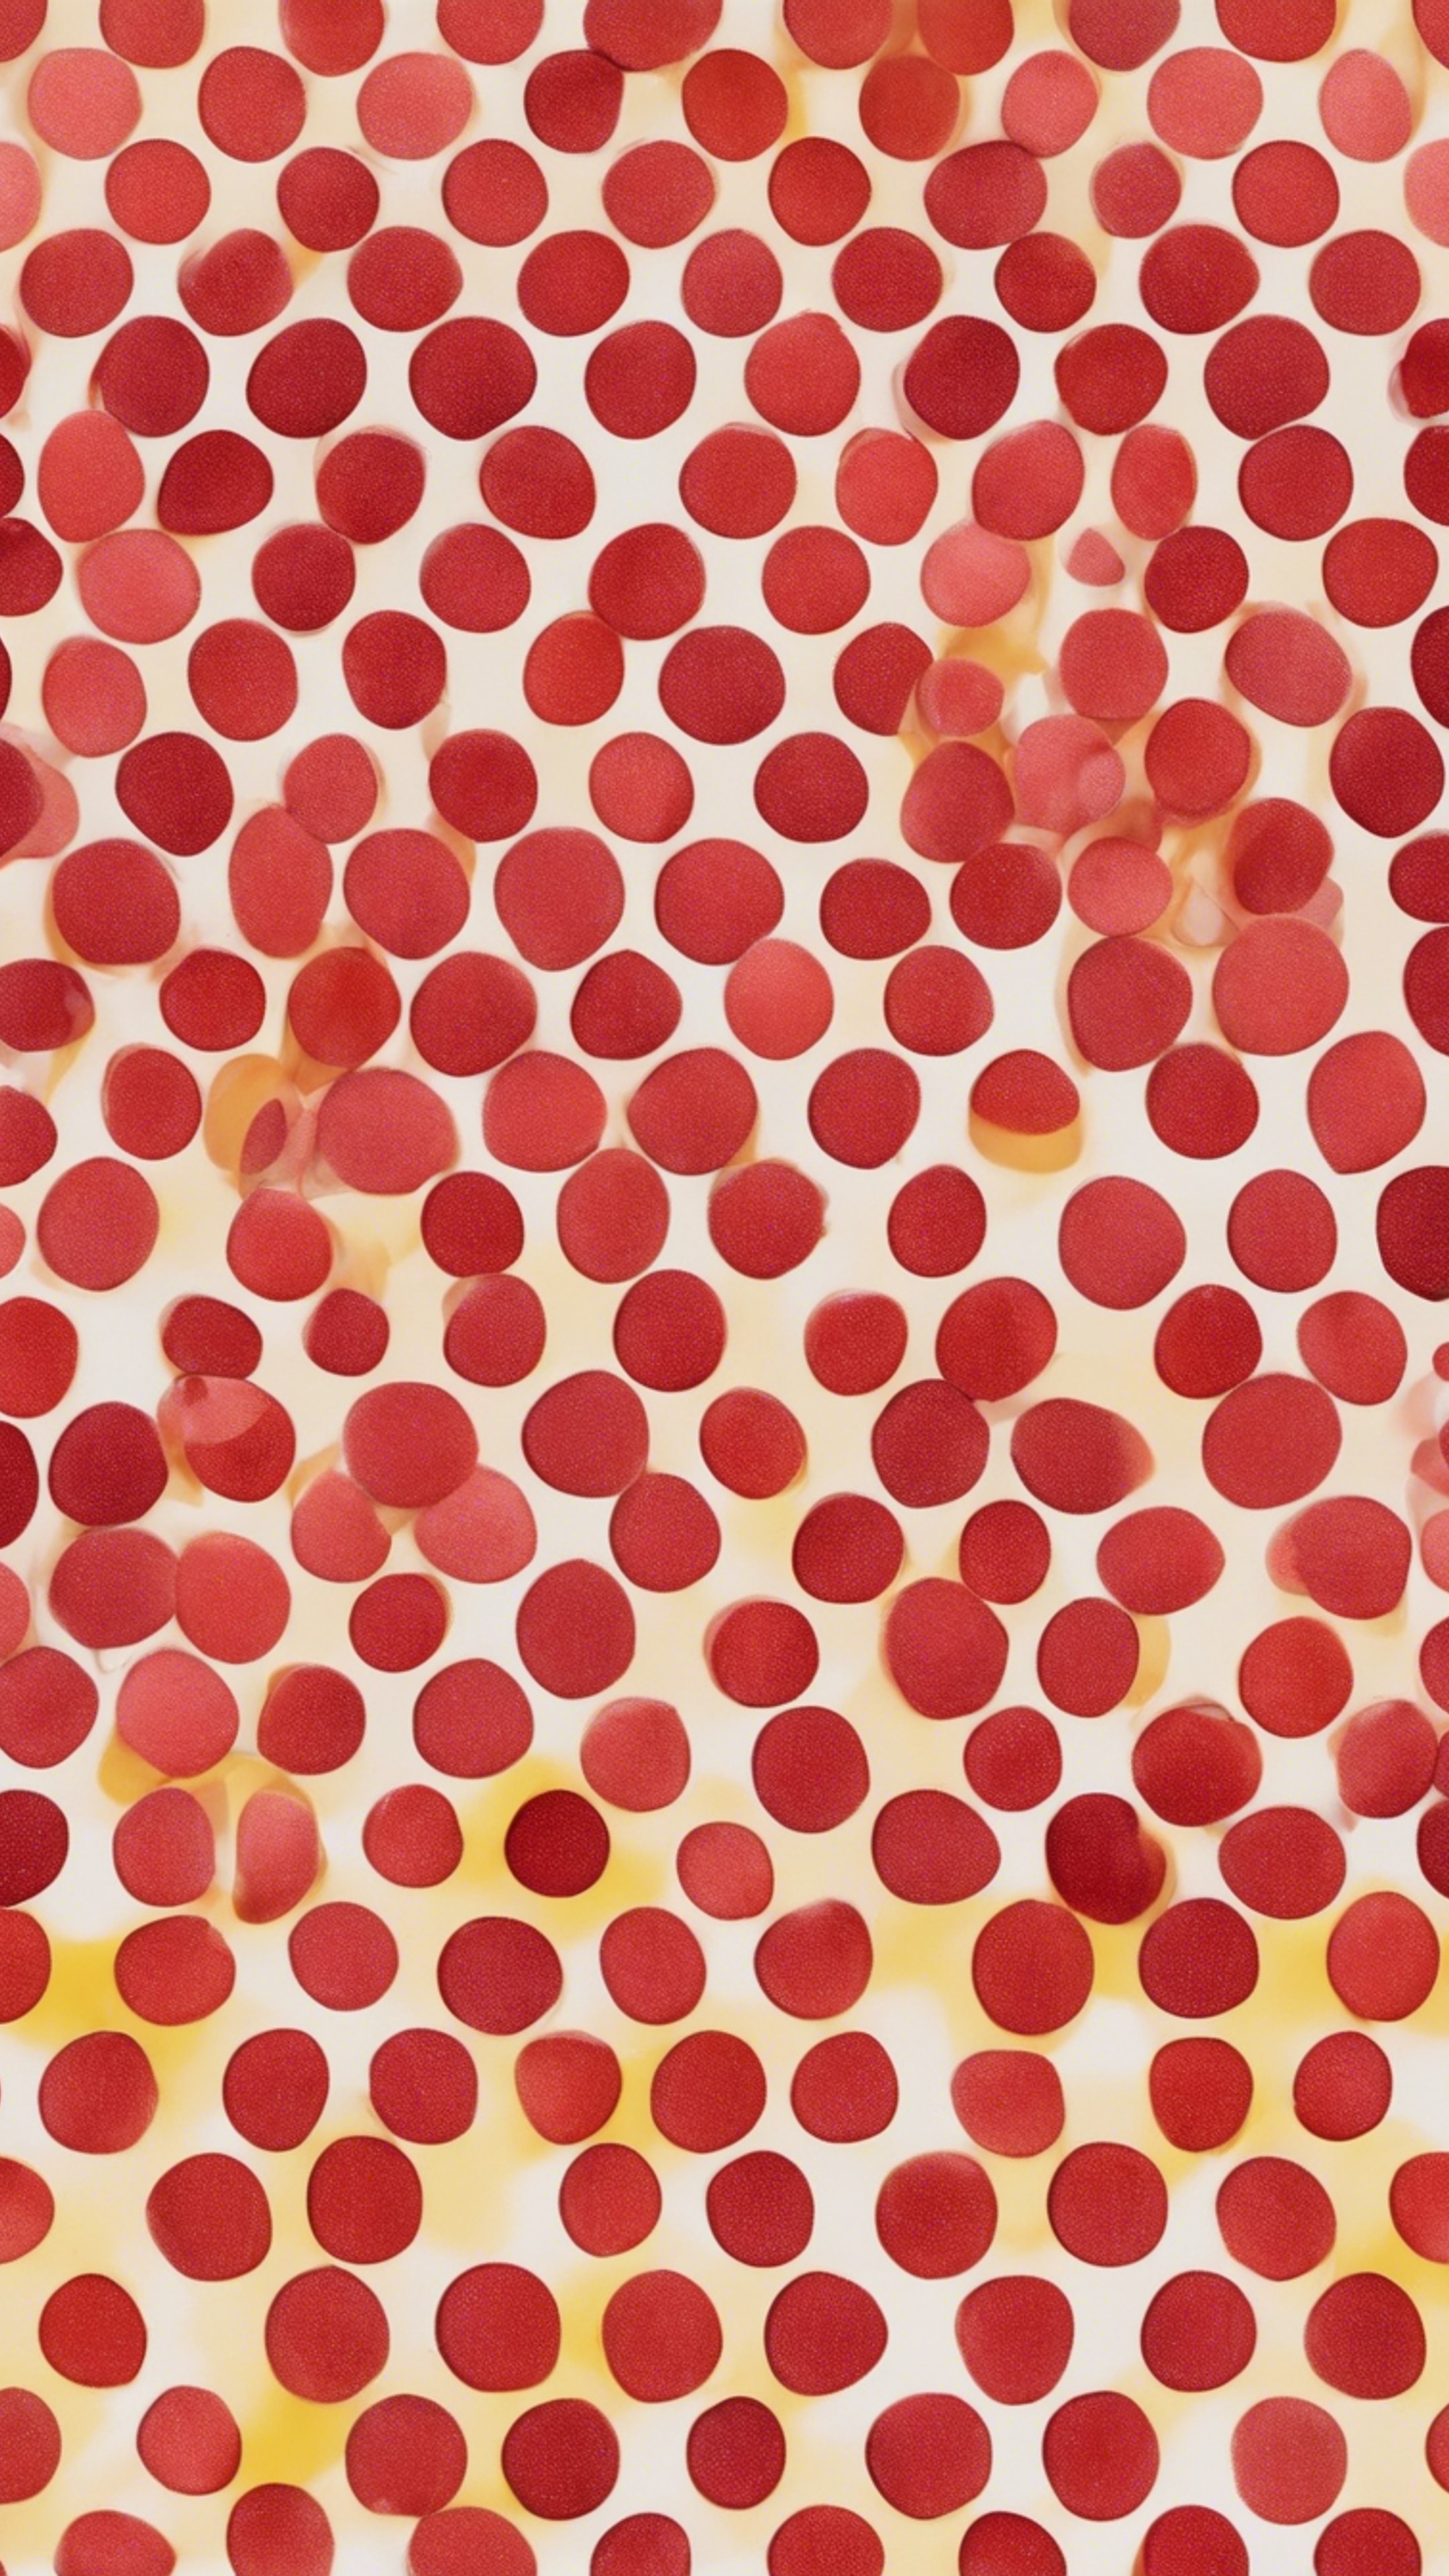 Red polka dots clashing beautifully with yellow ones, all over the seamless canvas. Wallpaper[6845ea3f5aaf42daa07d]